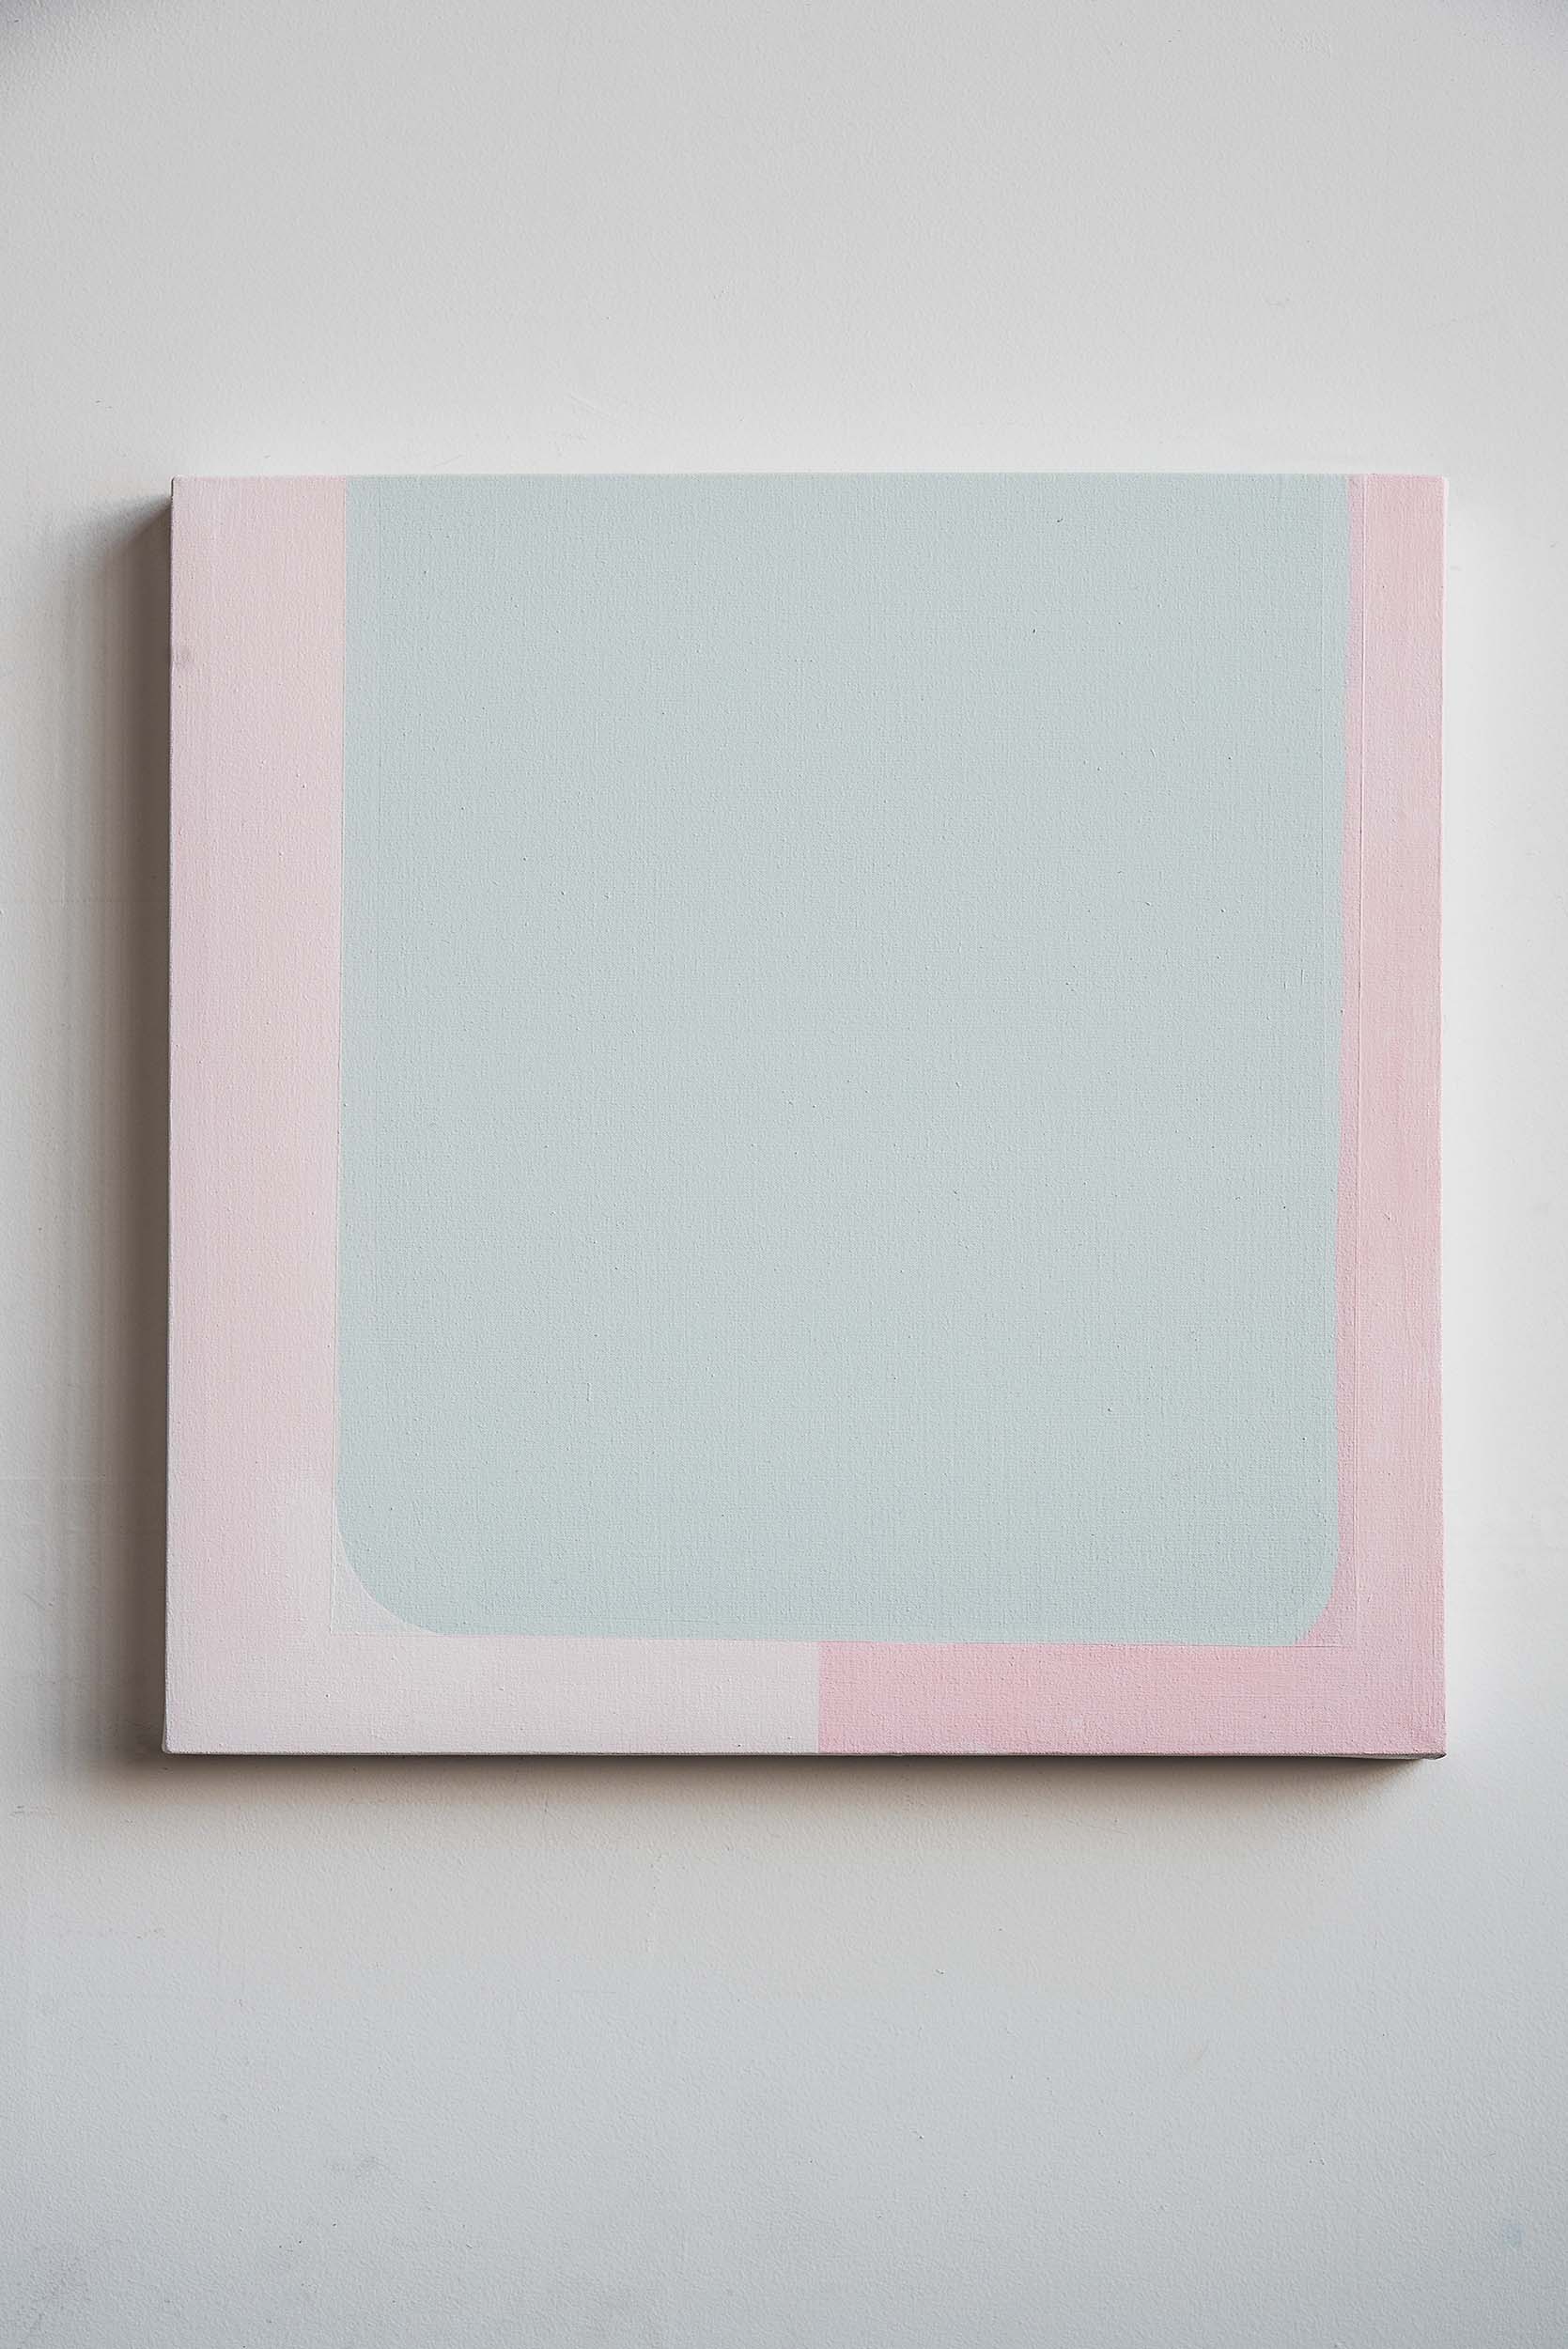 Emma Childs, Sweet Radio Silence, Acrylic on canvas, 24 x 24 in, 2018